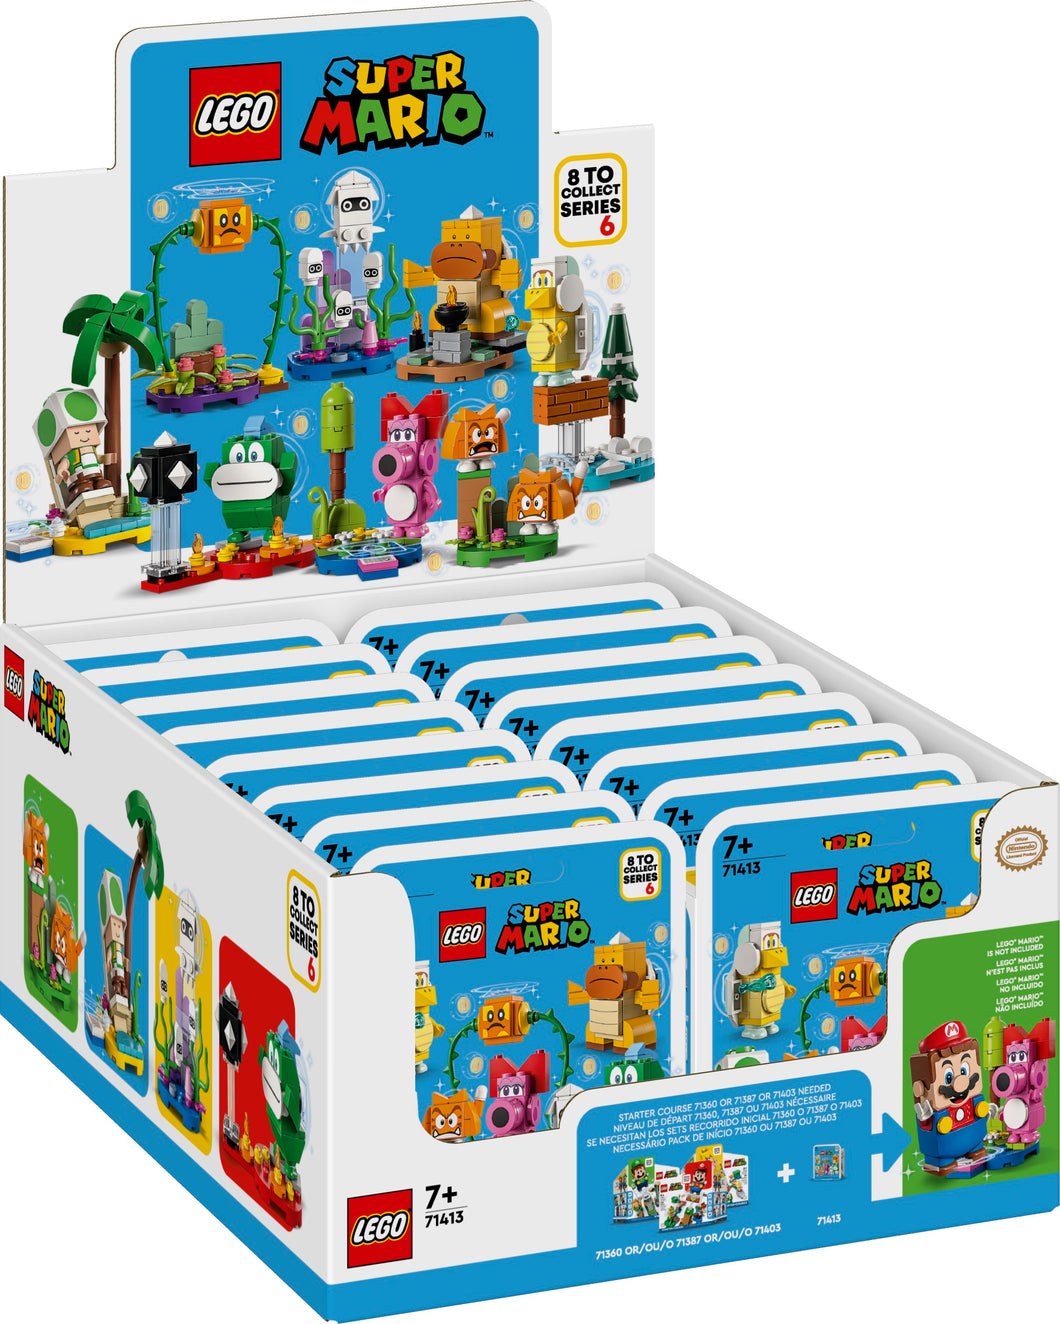 LEGO Super Mario Character Packs 71413 Series 6 Box Case of 16 Minifigures